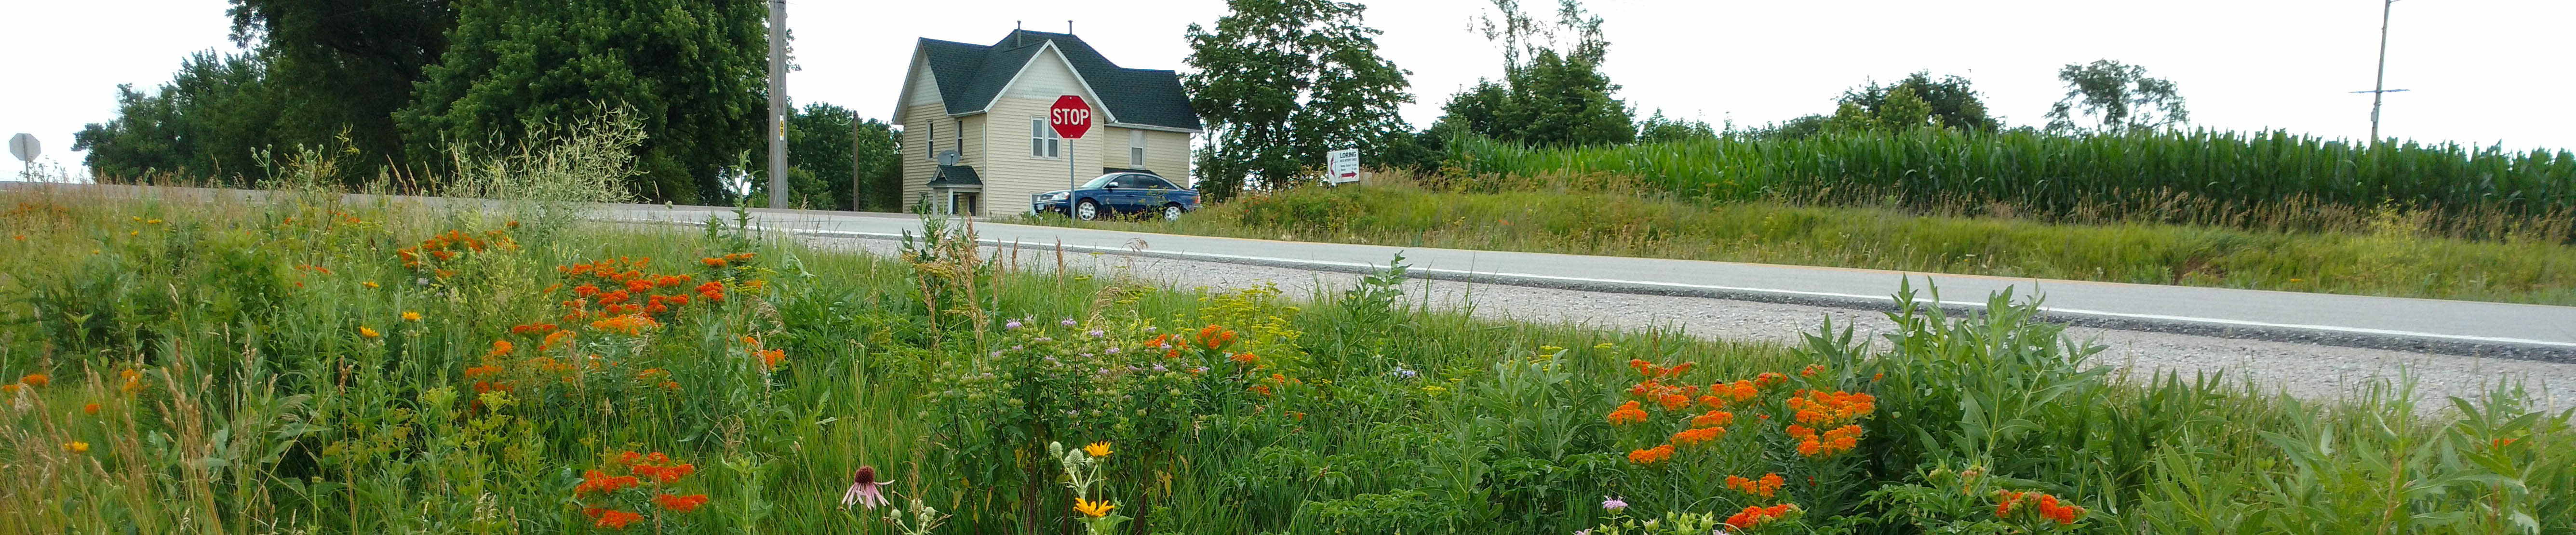 Orange flowers and other native vegetation in the foreground and a road and house in the background.